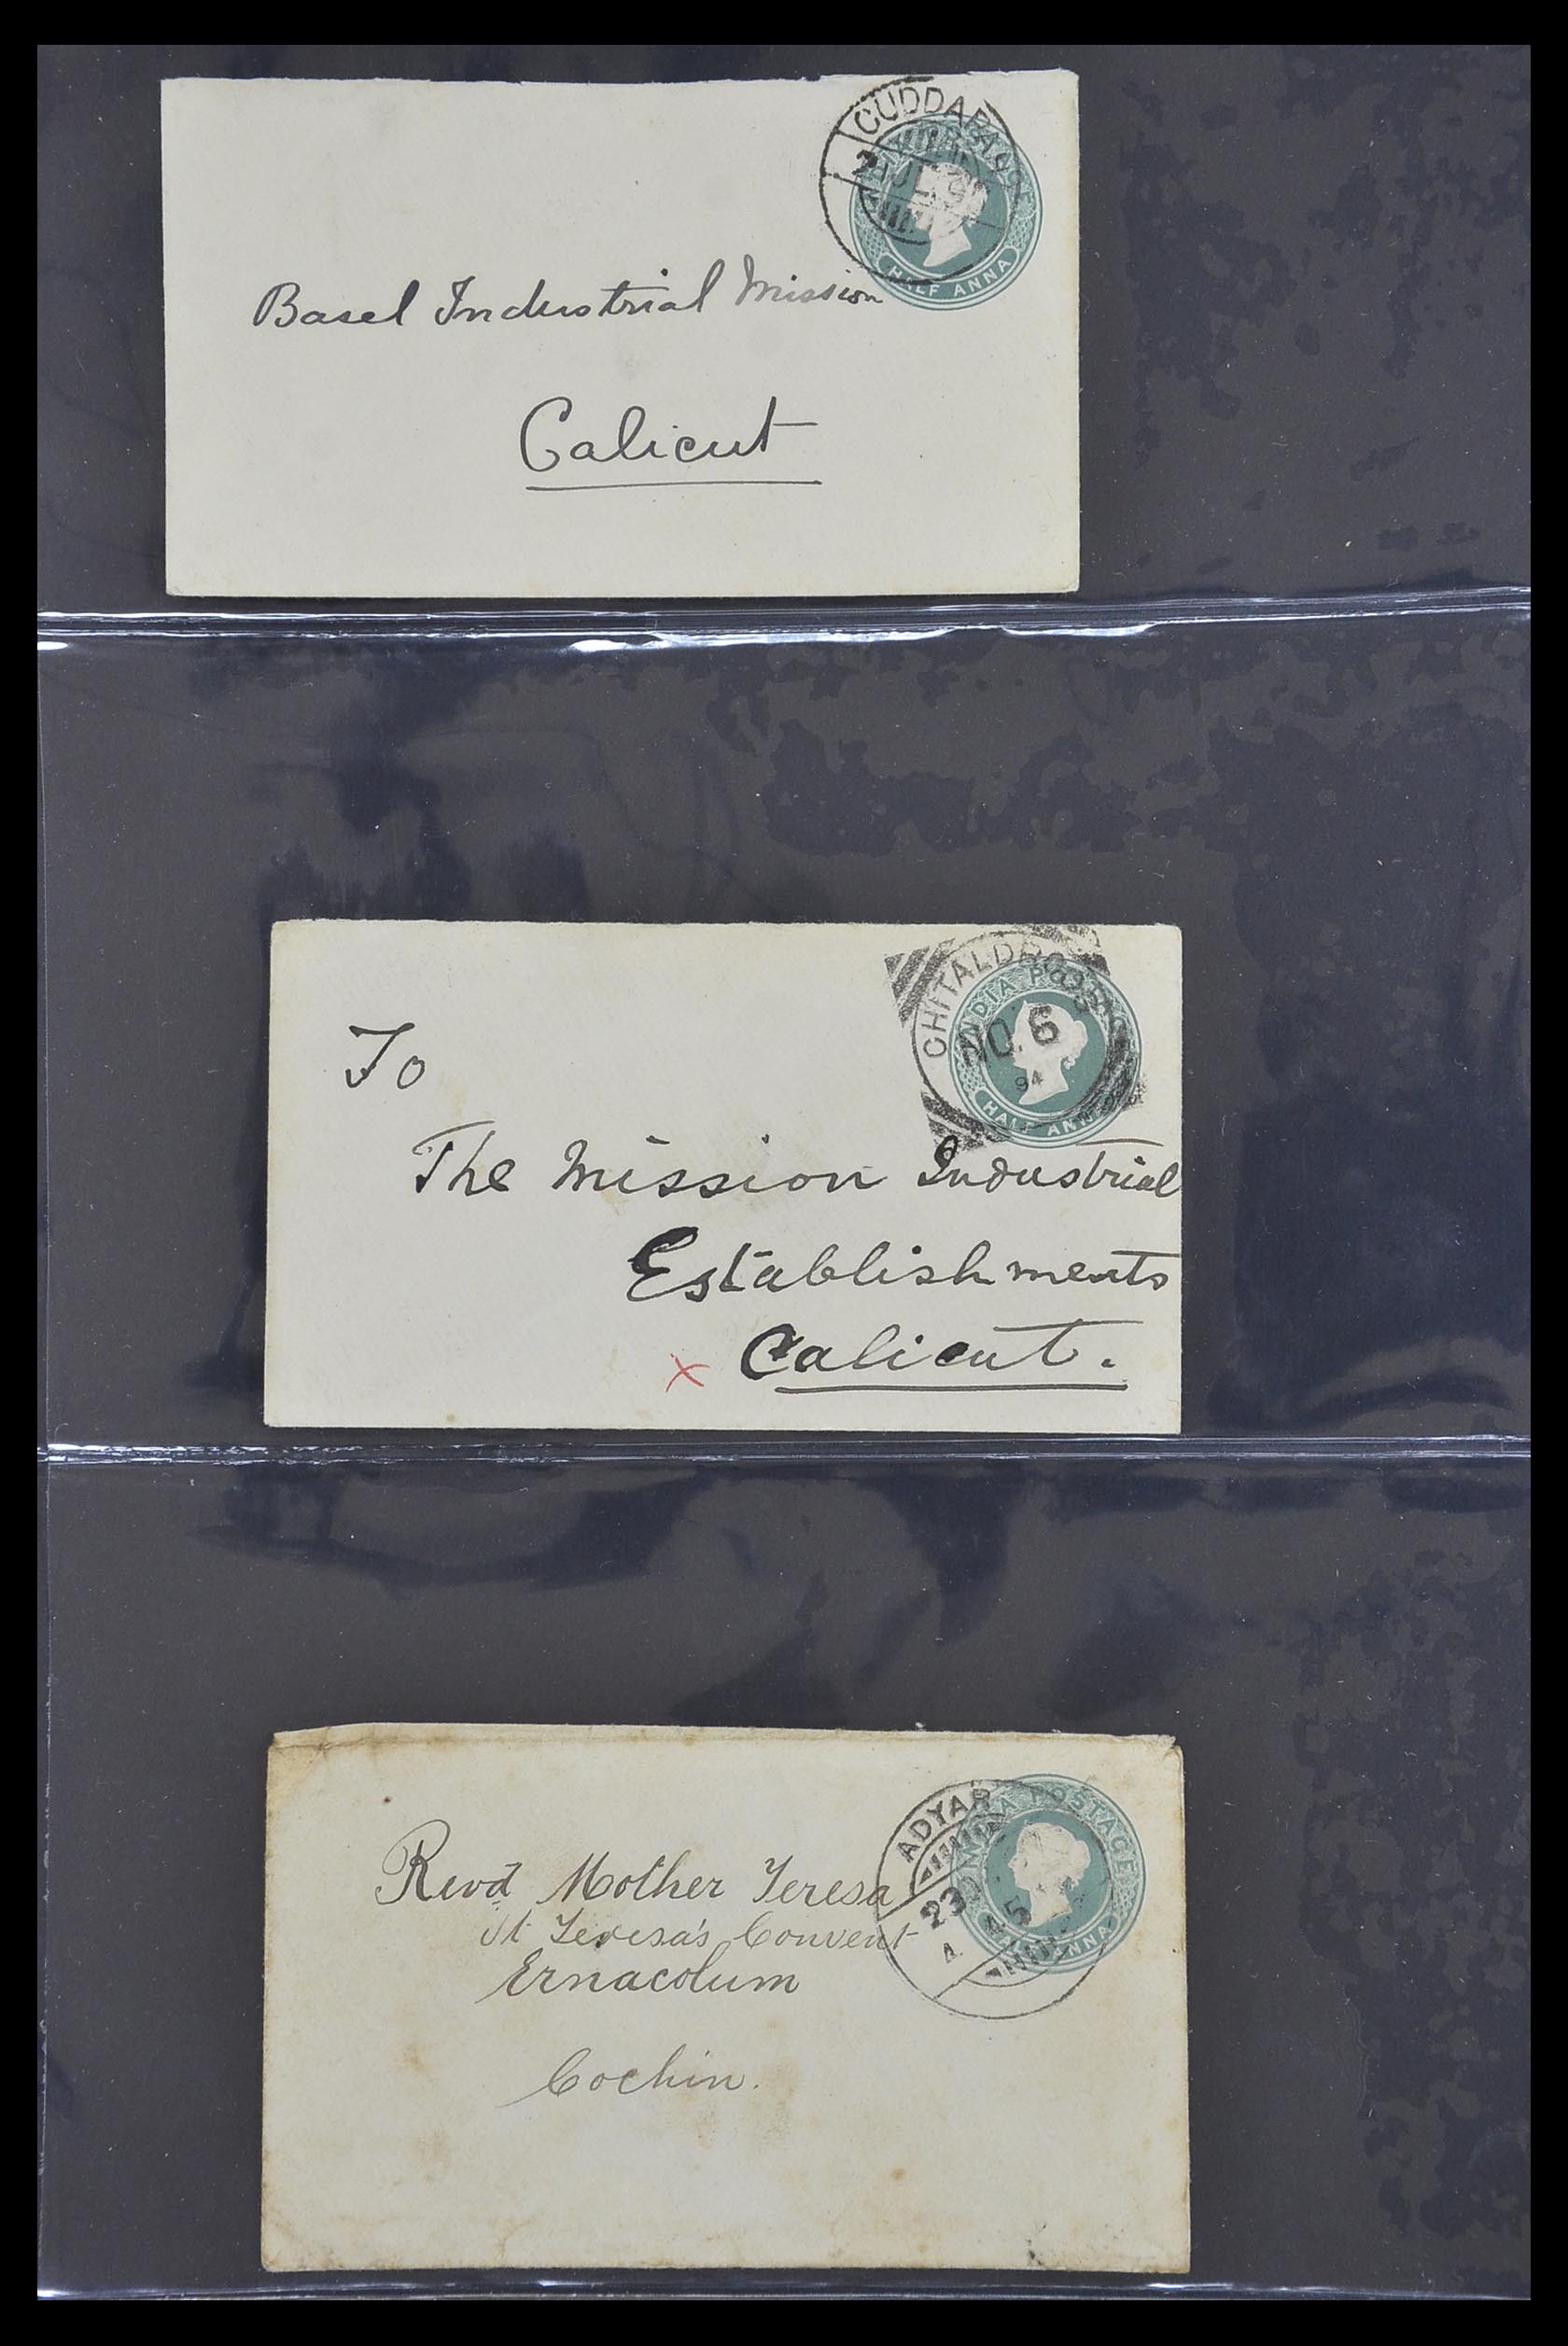 33724 154 - Stamp collection 33724 India and states covers 1865-1949.